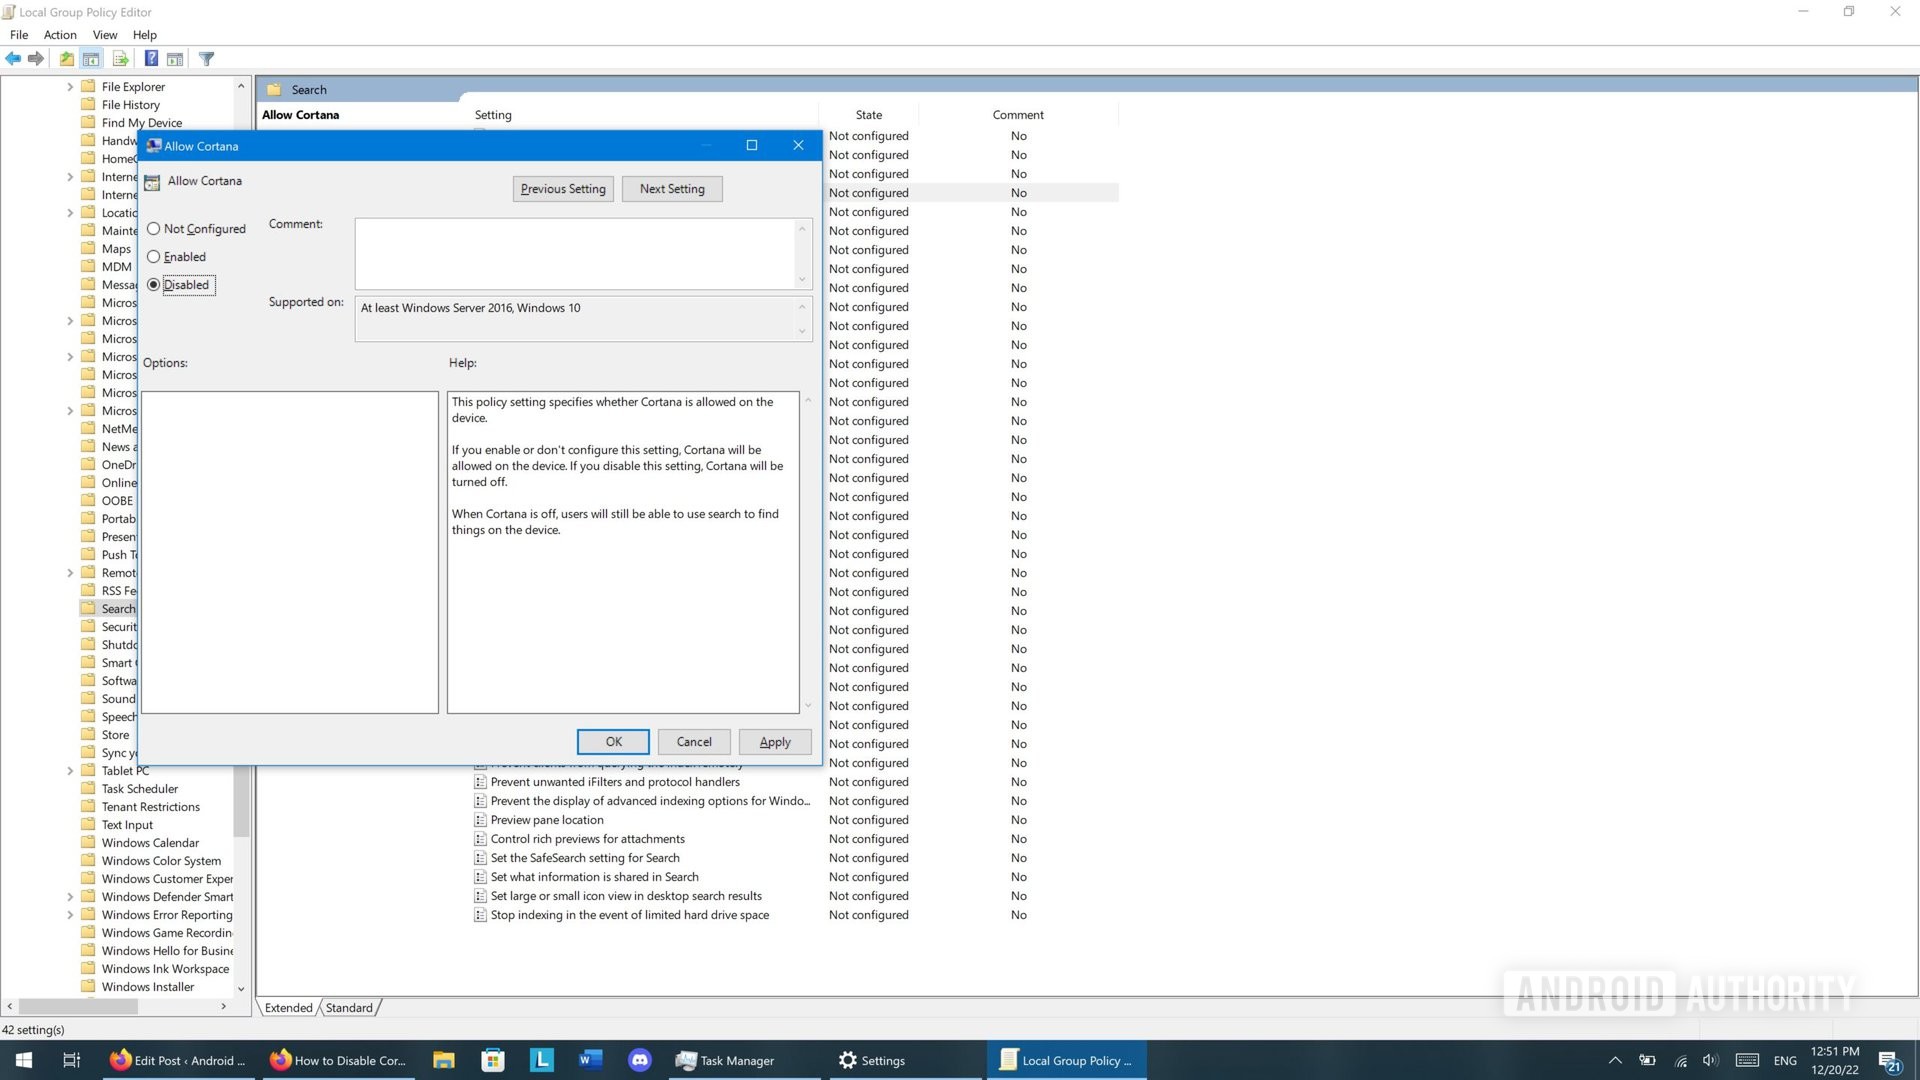 A screenshot of the Windows 10 Local Group Policy Editor showing the options available for the Cortana entry.